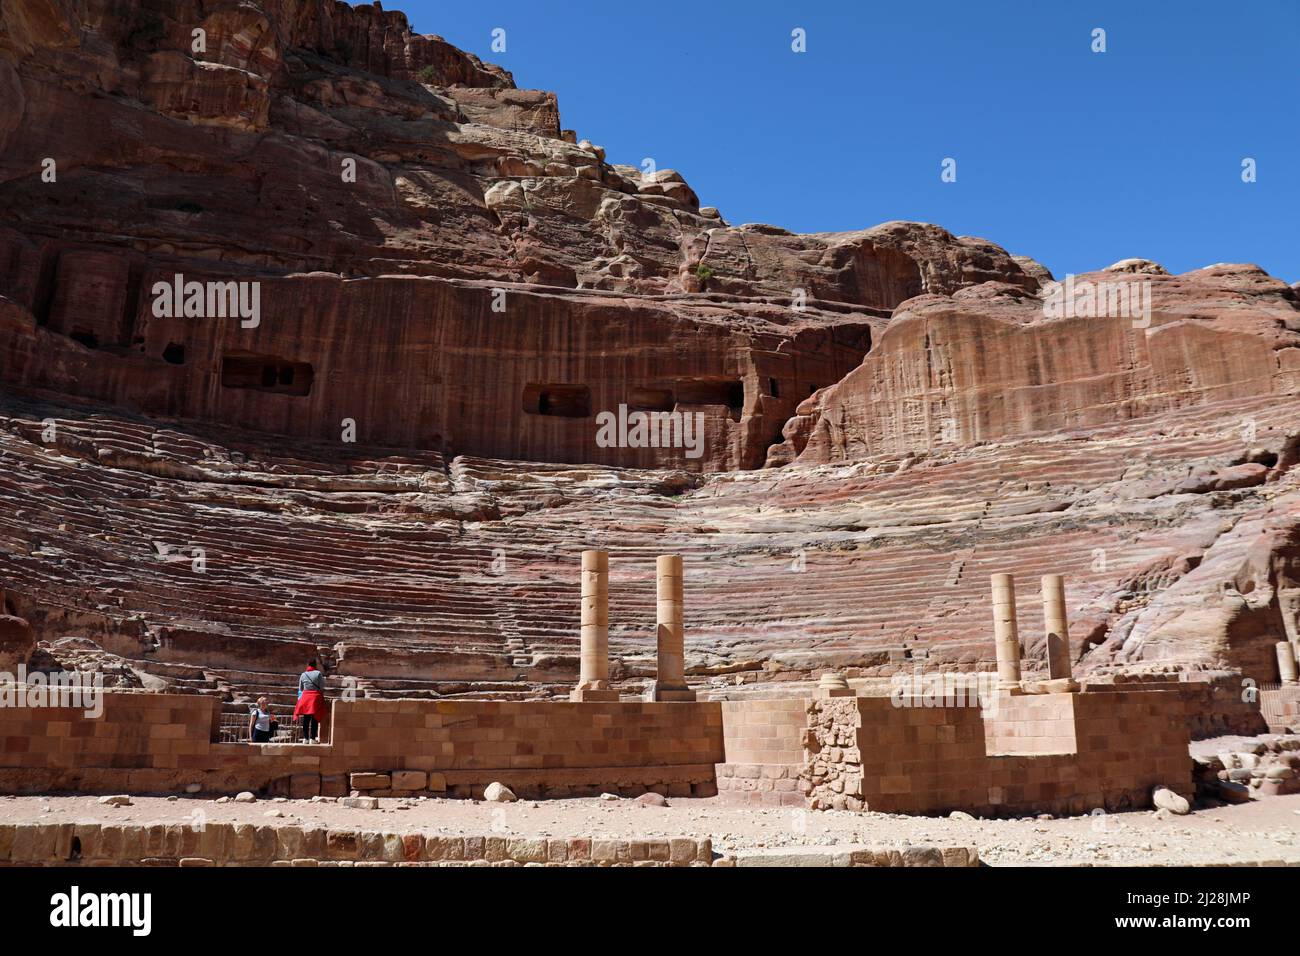 The Theatre at Petra Stock Photo